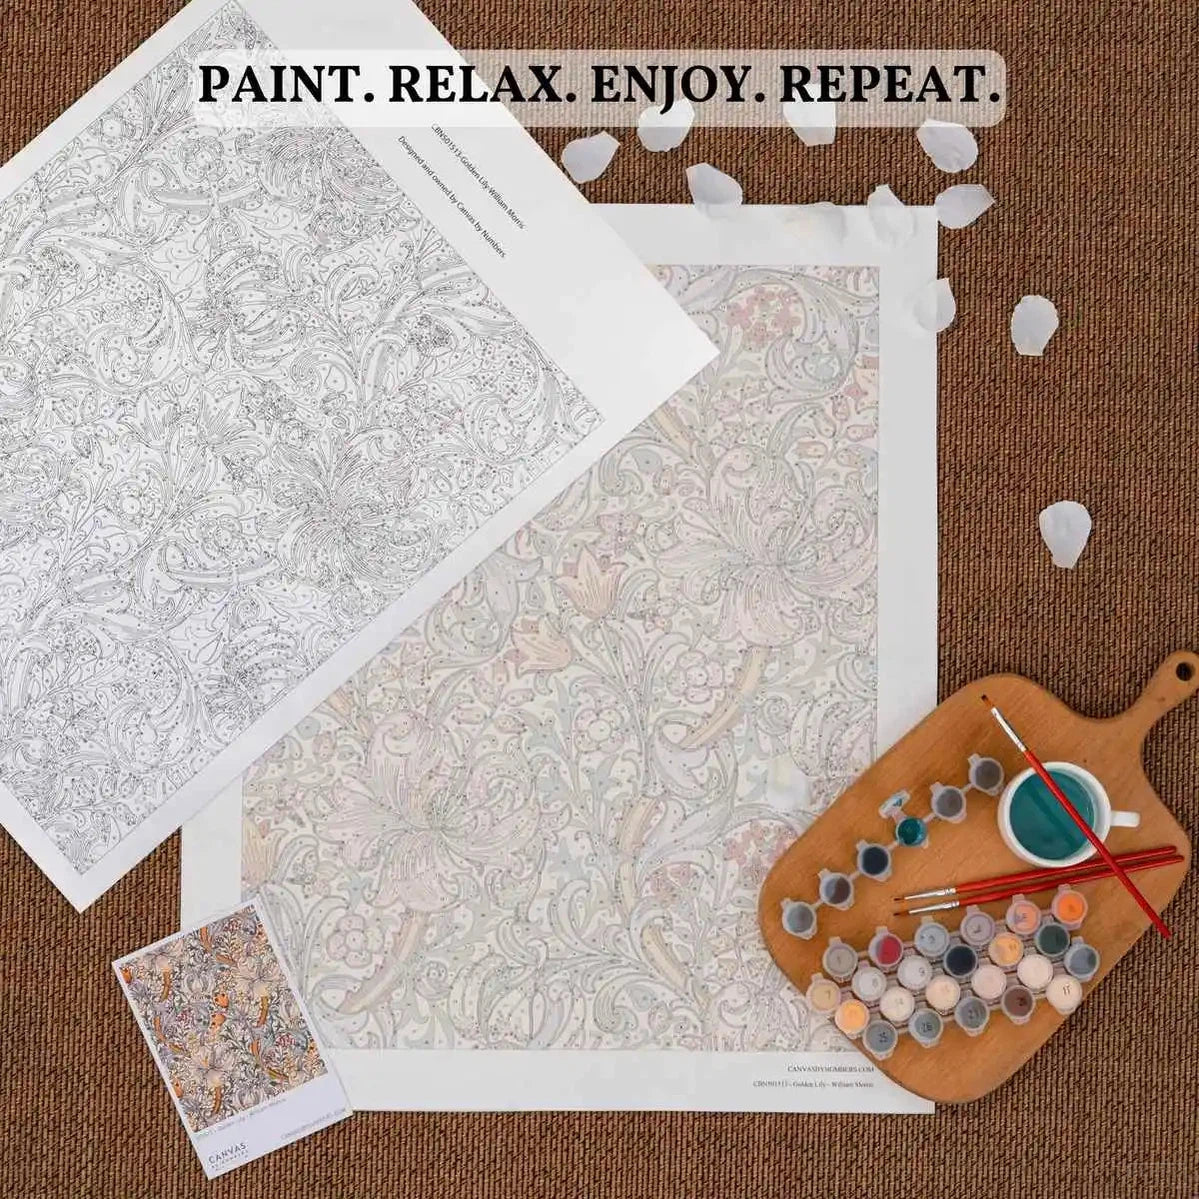 Sunflower Park - Paint by Numbers-A paint by numbers masterpiece full of detail by Gustav Klimt. Brought to you by Canvas by Numbers for a frustration-free artistic experience.-Canvas by Numbers